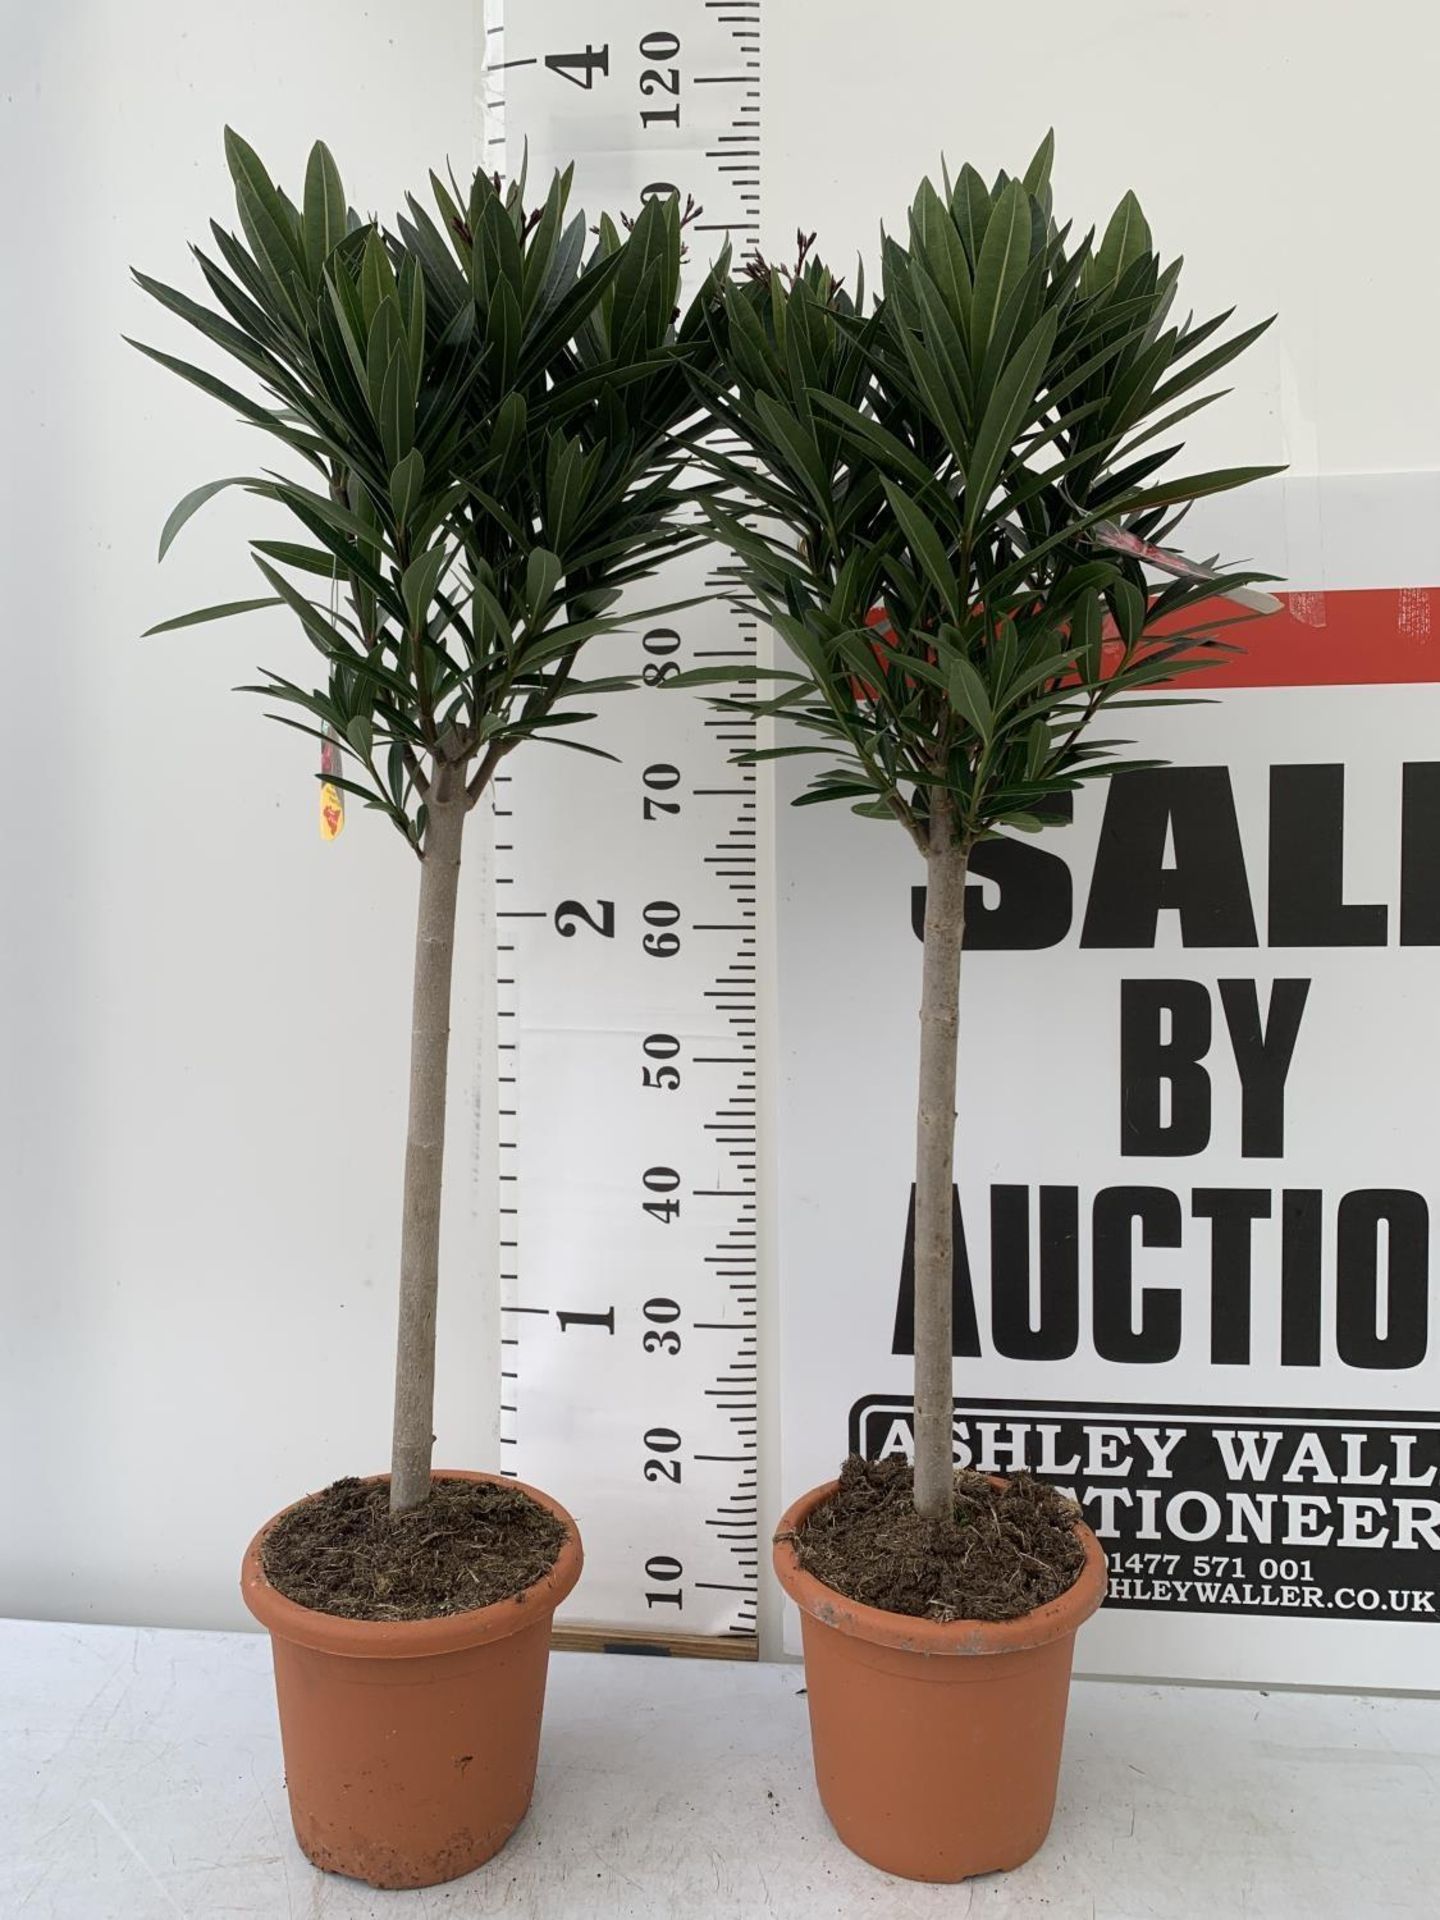 TWO NERIUM OLEANDER STANDARD TREES 'DOUBLE PINK' APPROX 110CM IN HEIGHT IN 4 LTR POTS PLUS VAT TO BE